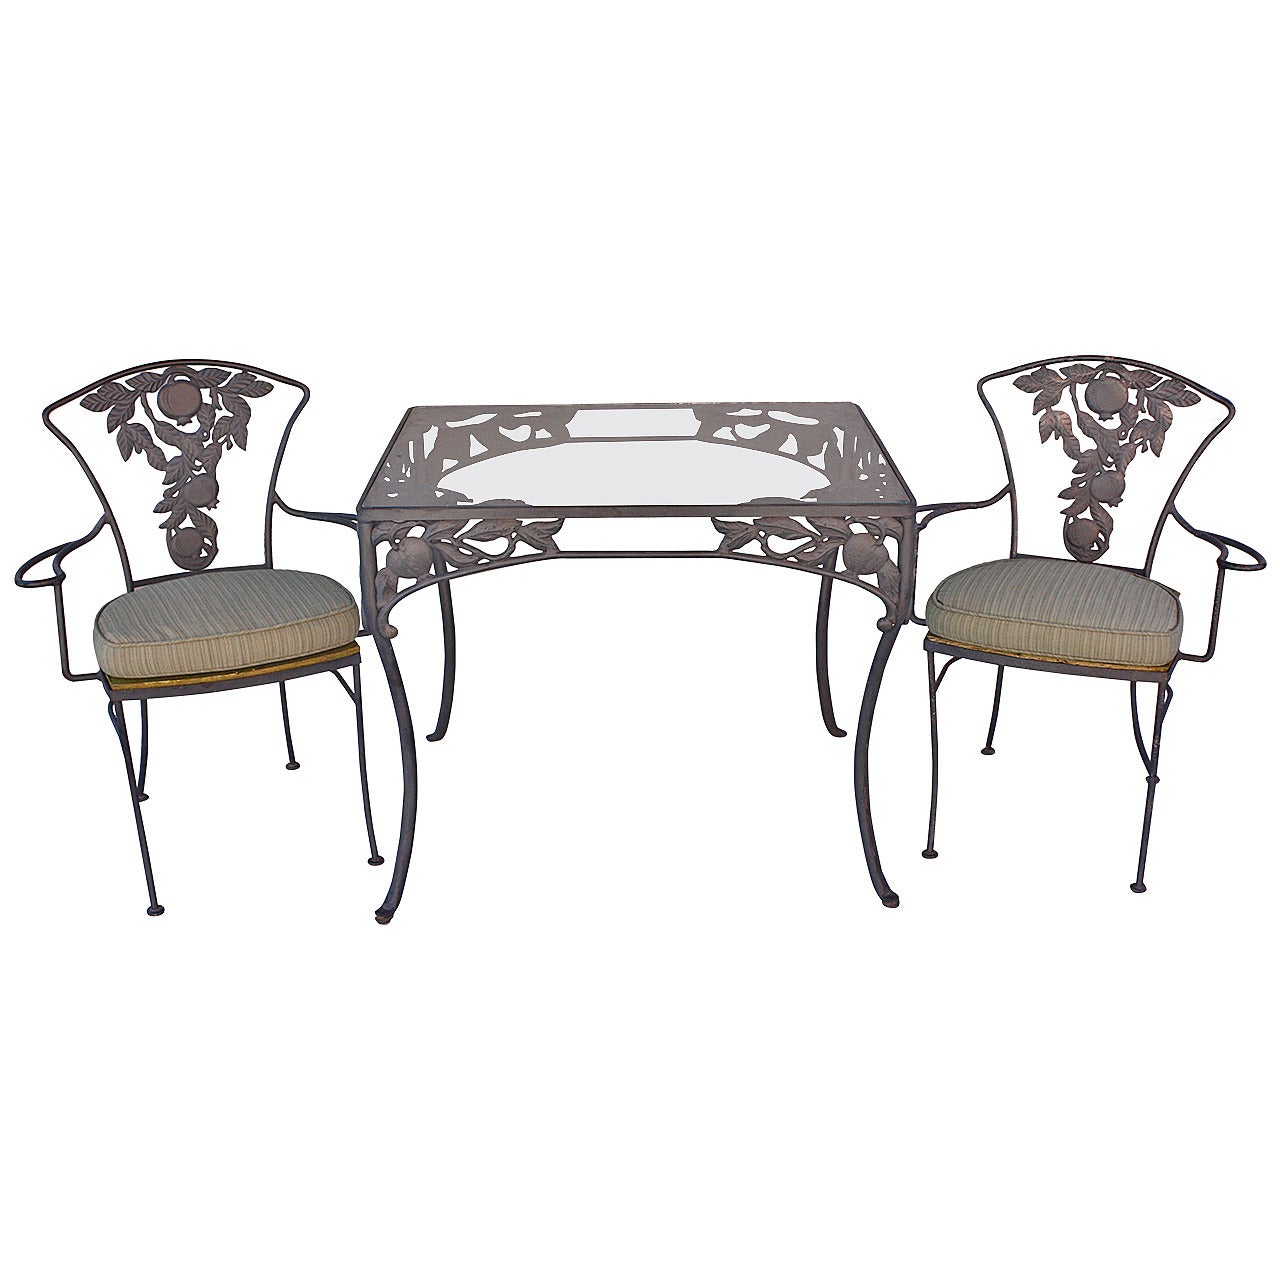 1940s Pomegranate Patio Set, Table and Two Chairs